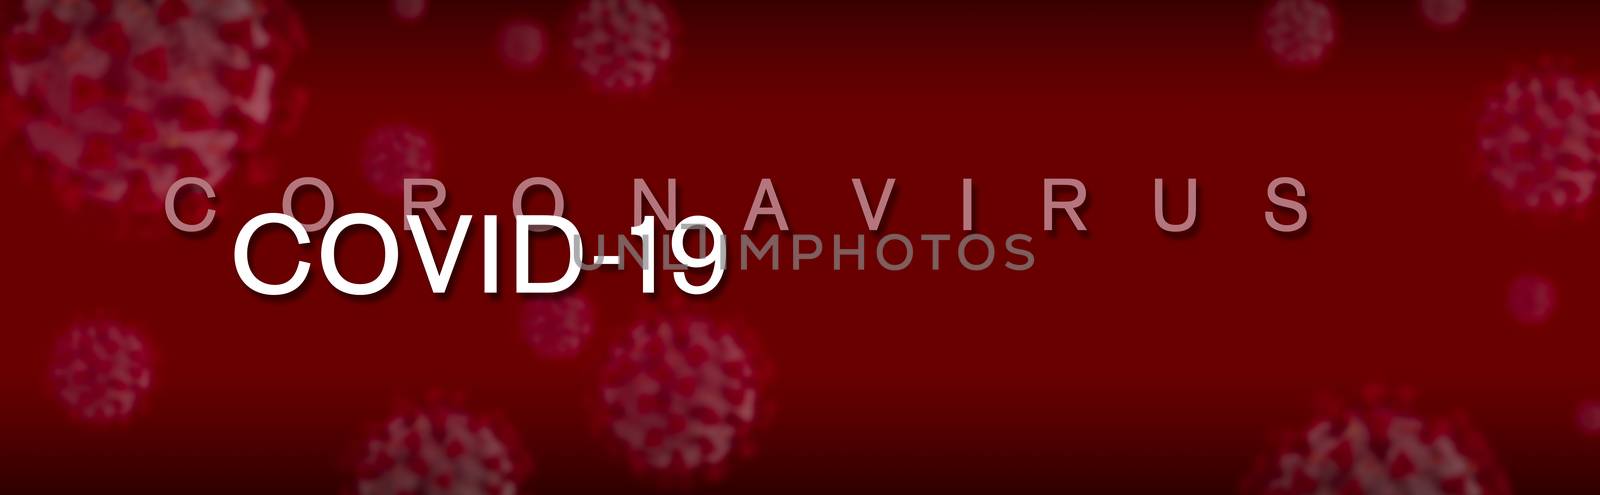 Red Banner of Coronavirus COVID-19 Cells Background by Feverpitched